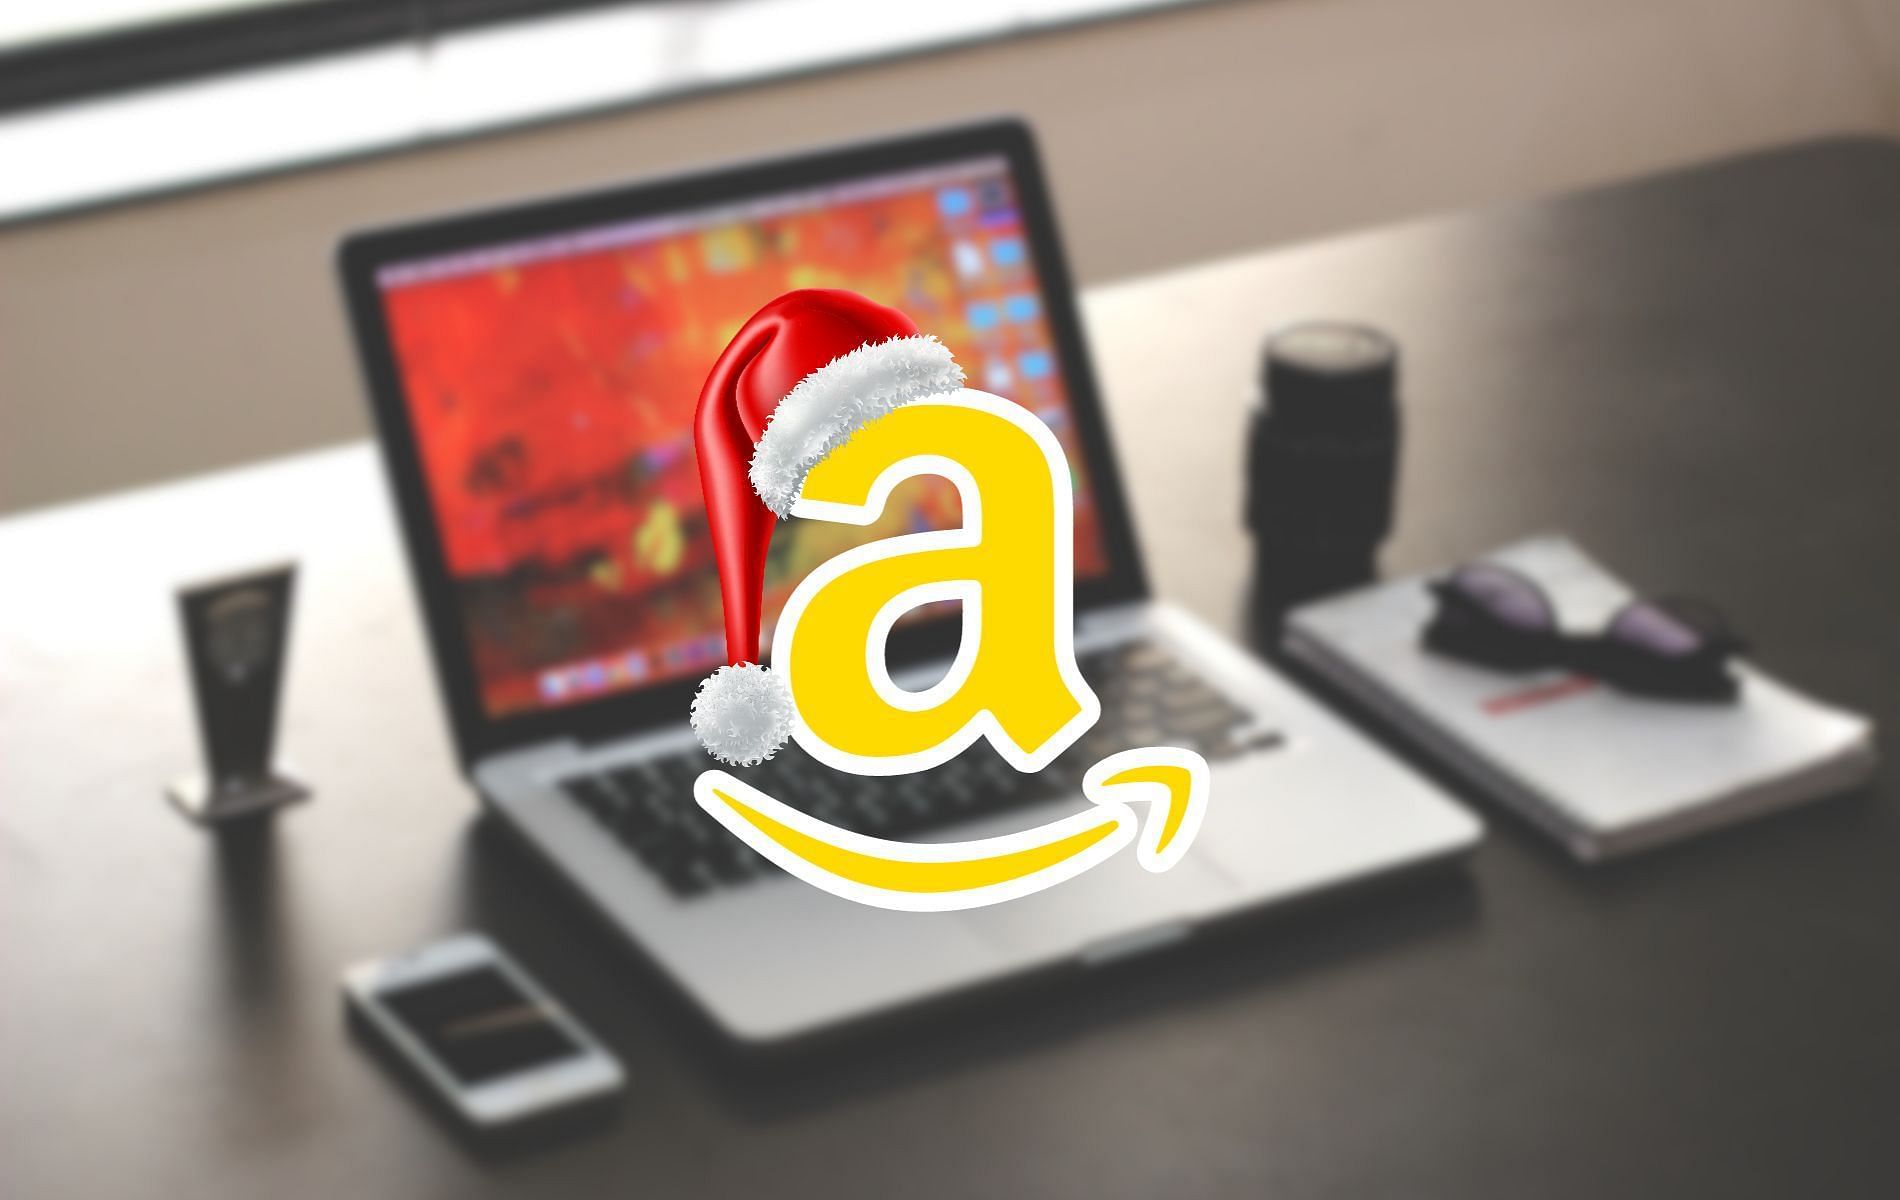 Image showing Amazon logo with a laptop and a few other equipments in the background